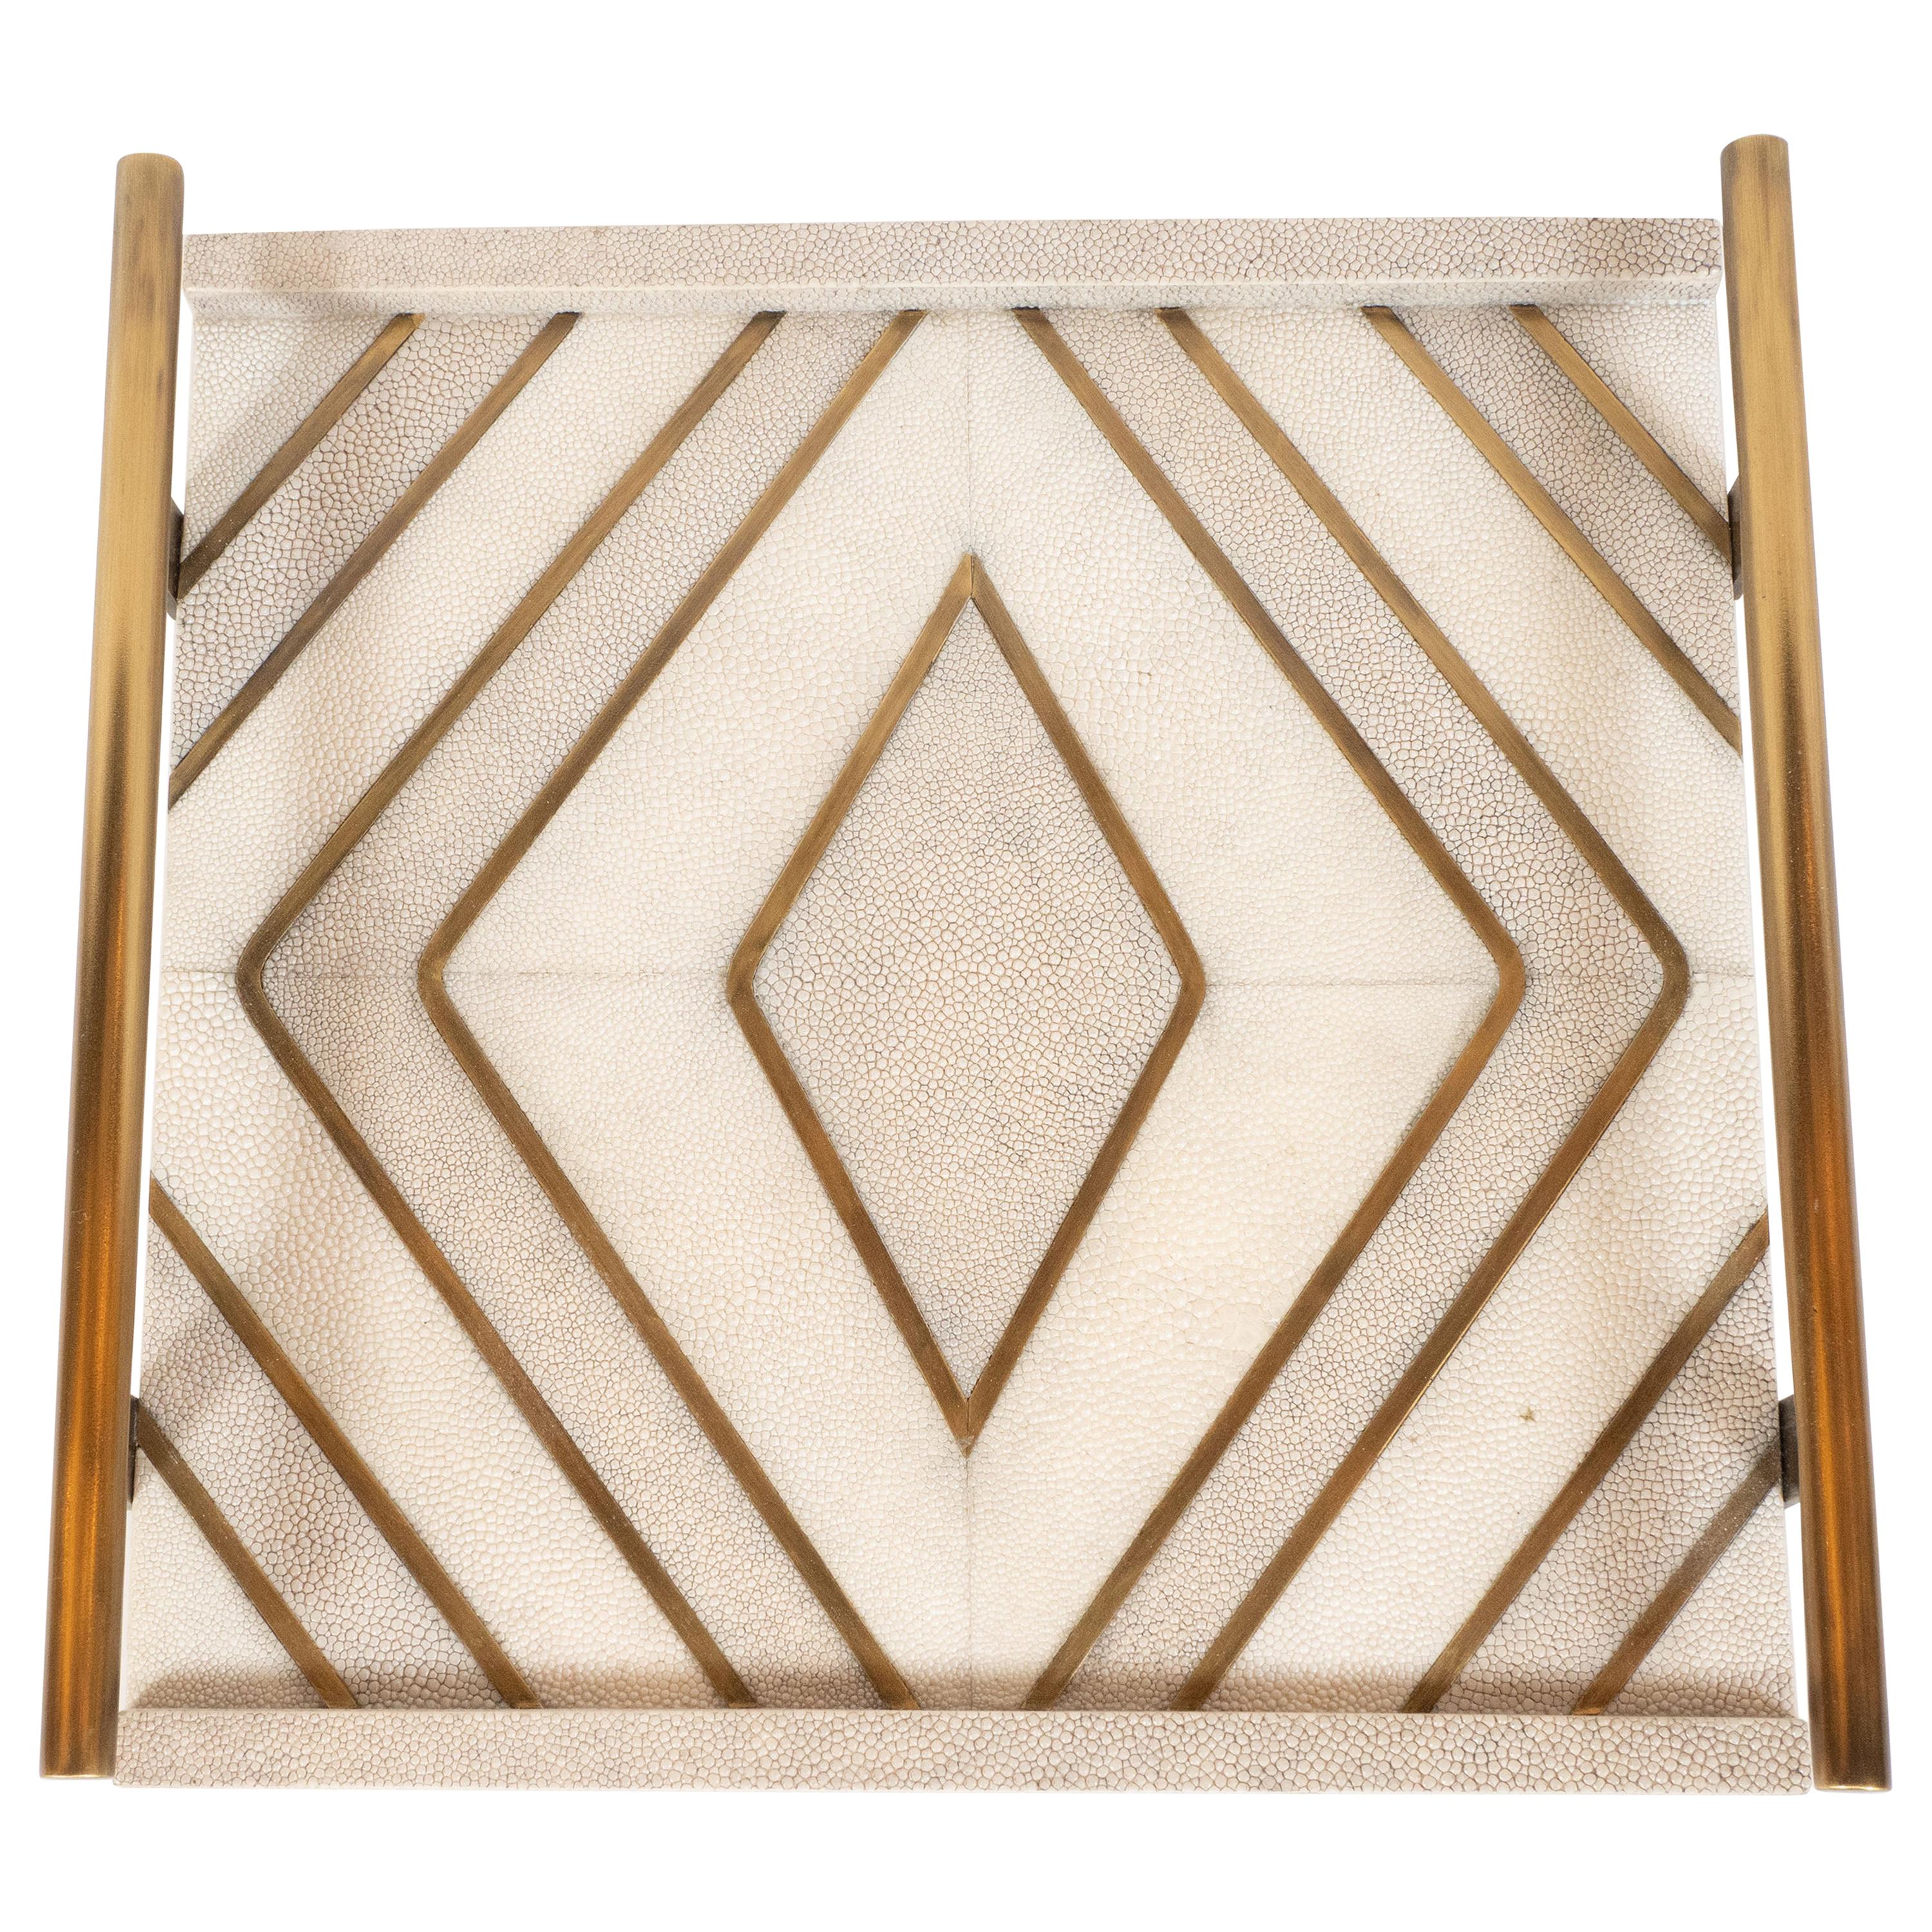 Modernist Concentric Diamond Form Shagreen and Brass Inlay Tray by Kifu, Paris